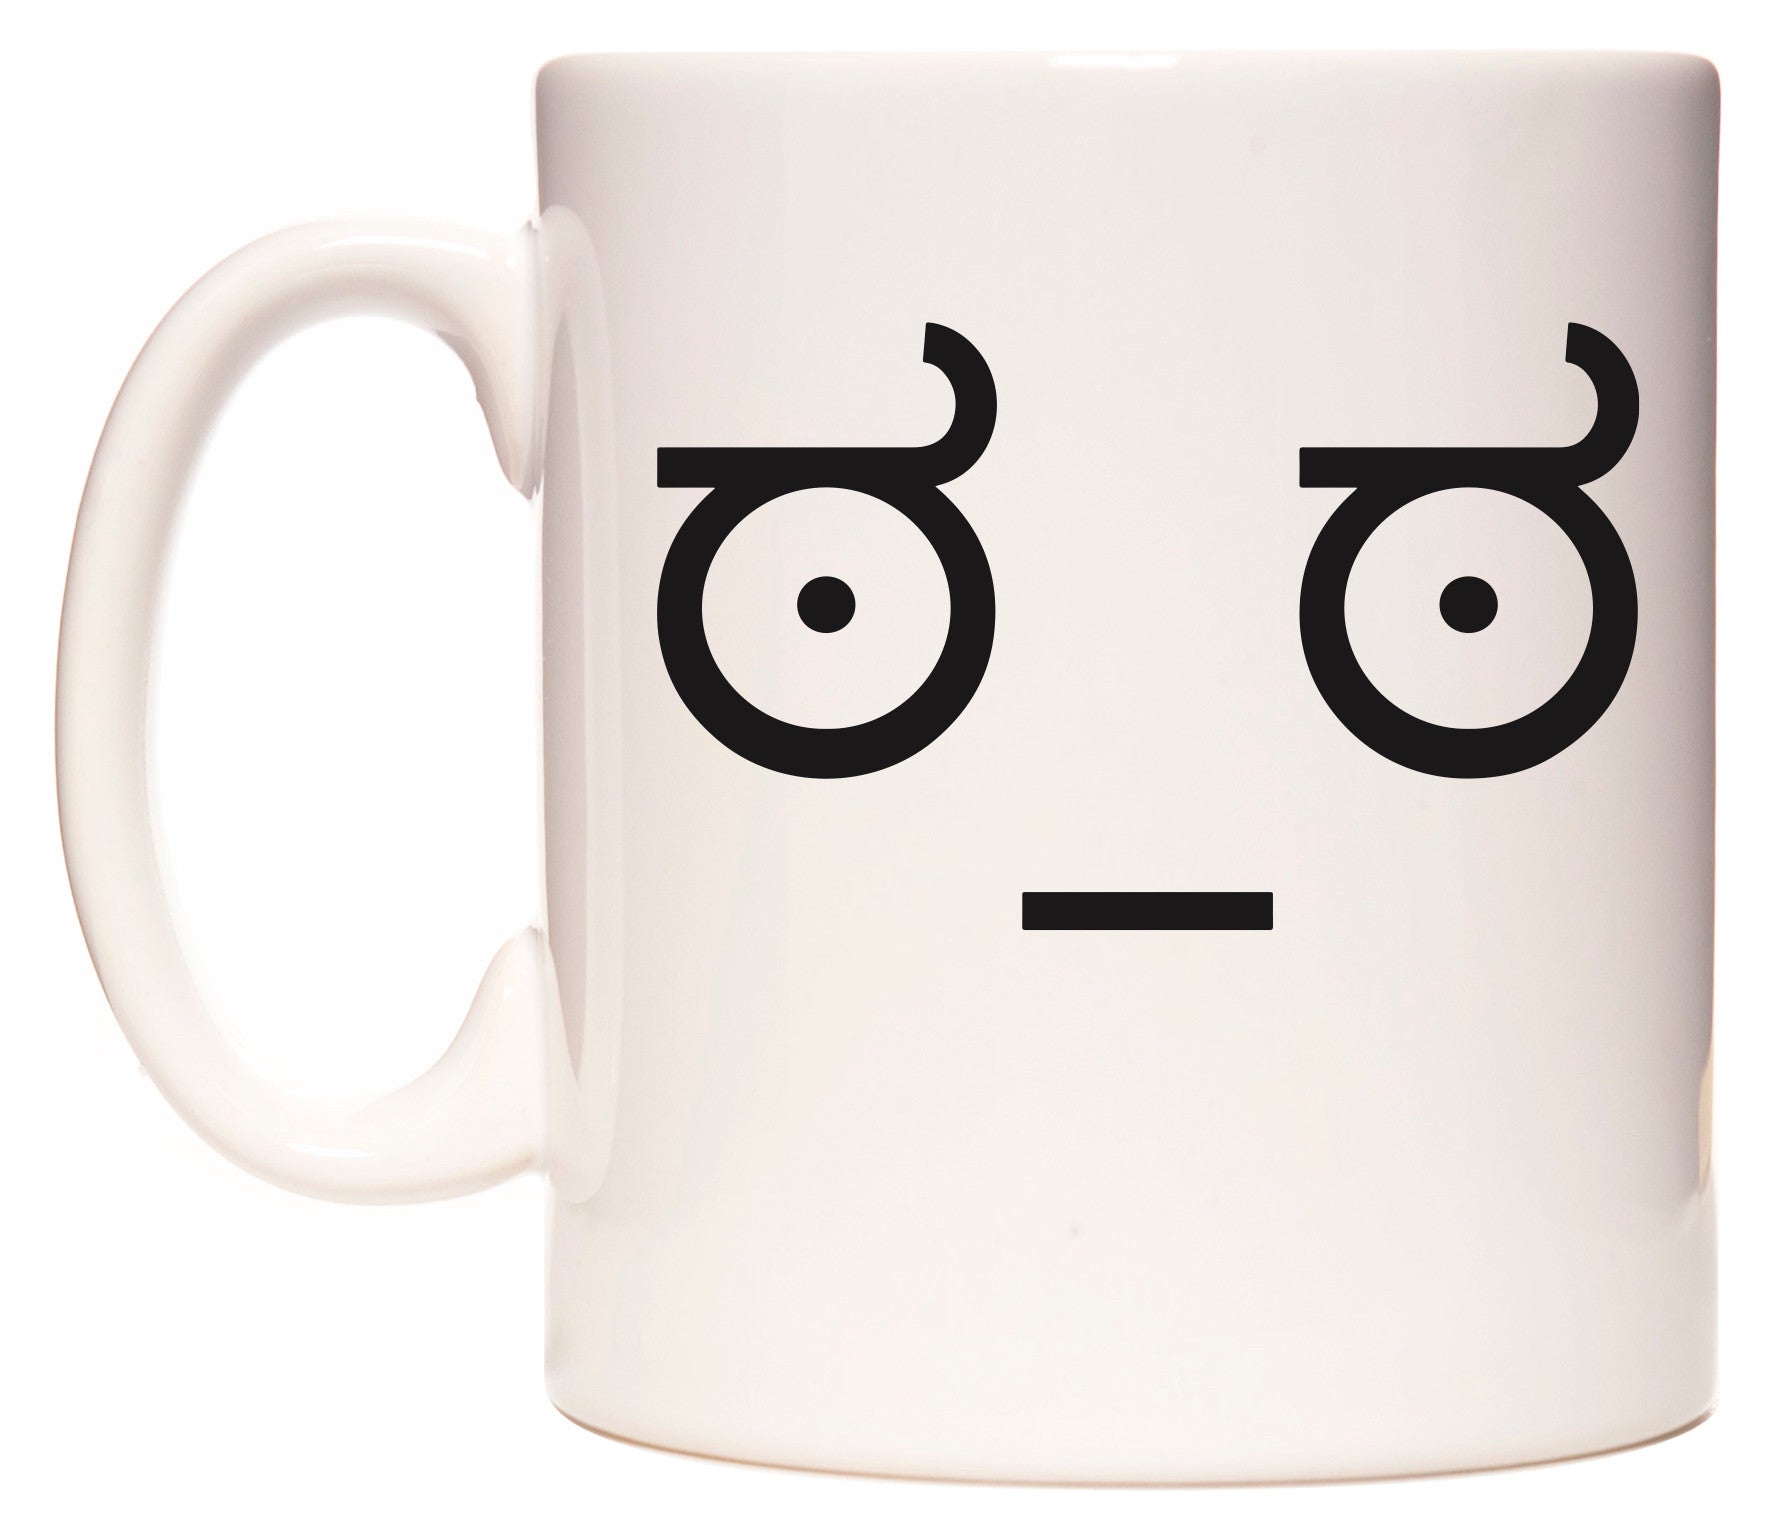 This mug features Look of Disapproval